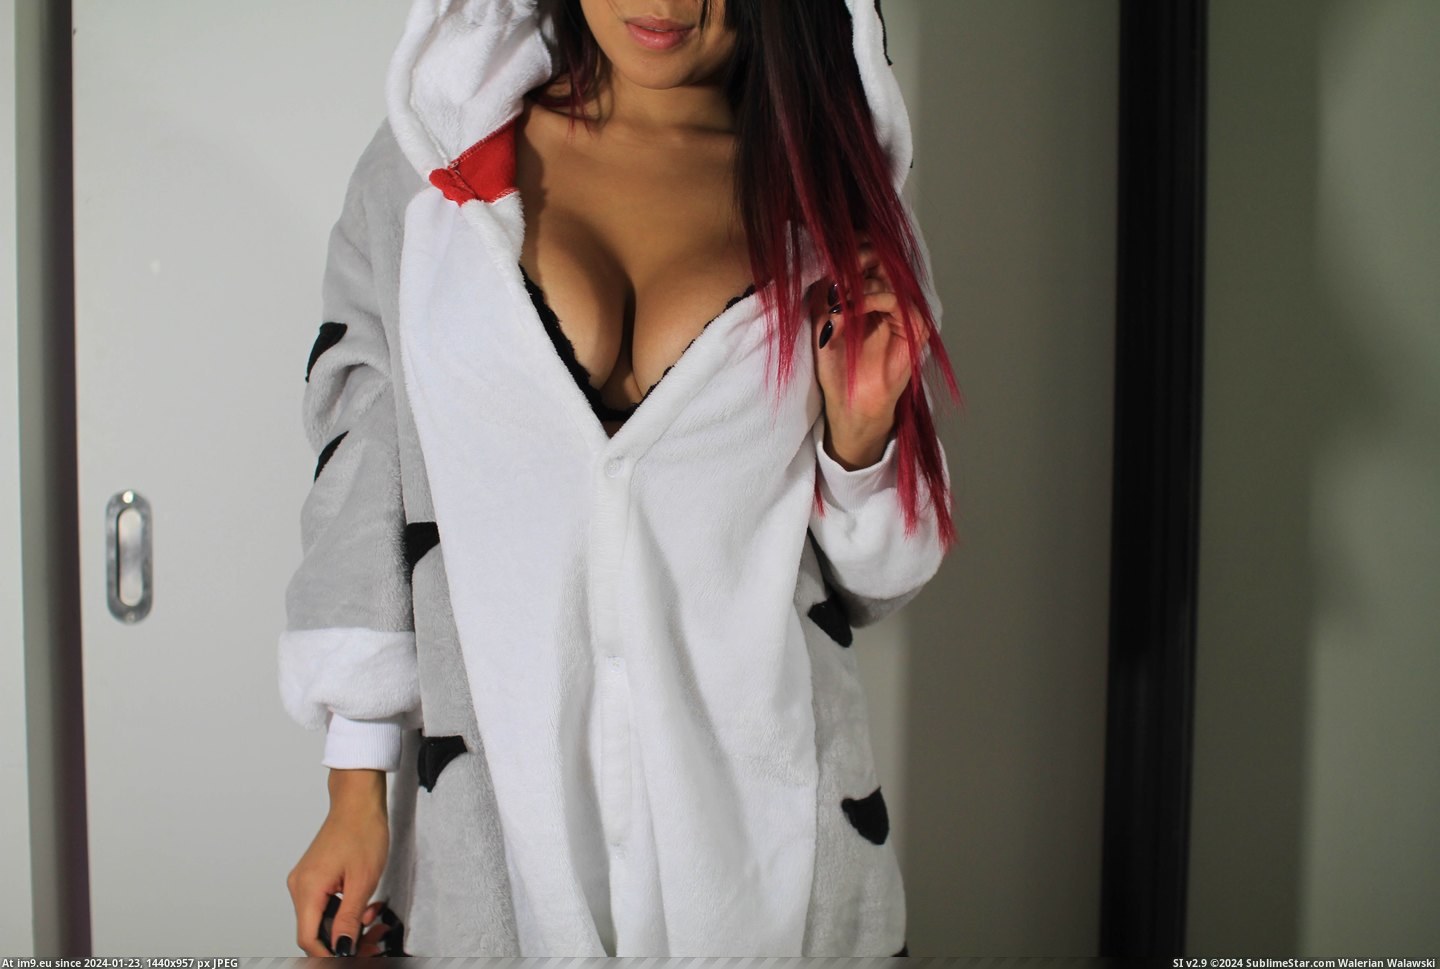 #Sexy #Was #How #Told #Onesie #Cat #Way [Gonewild] I was told there was no way I could make my cat onesie sexy, how'd I do GW? [f] 4 Pic. (Obraz z album My r/GONEWILD favs))